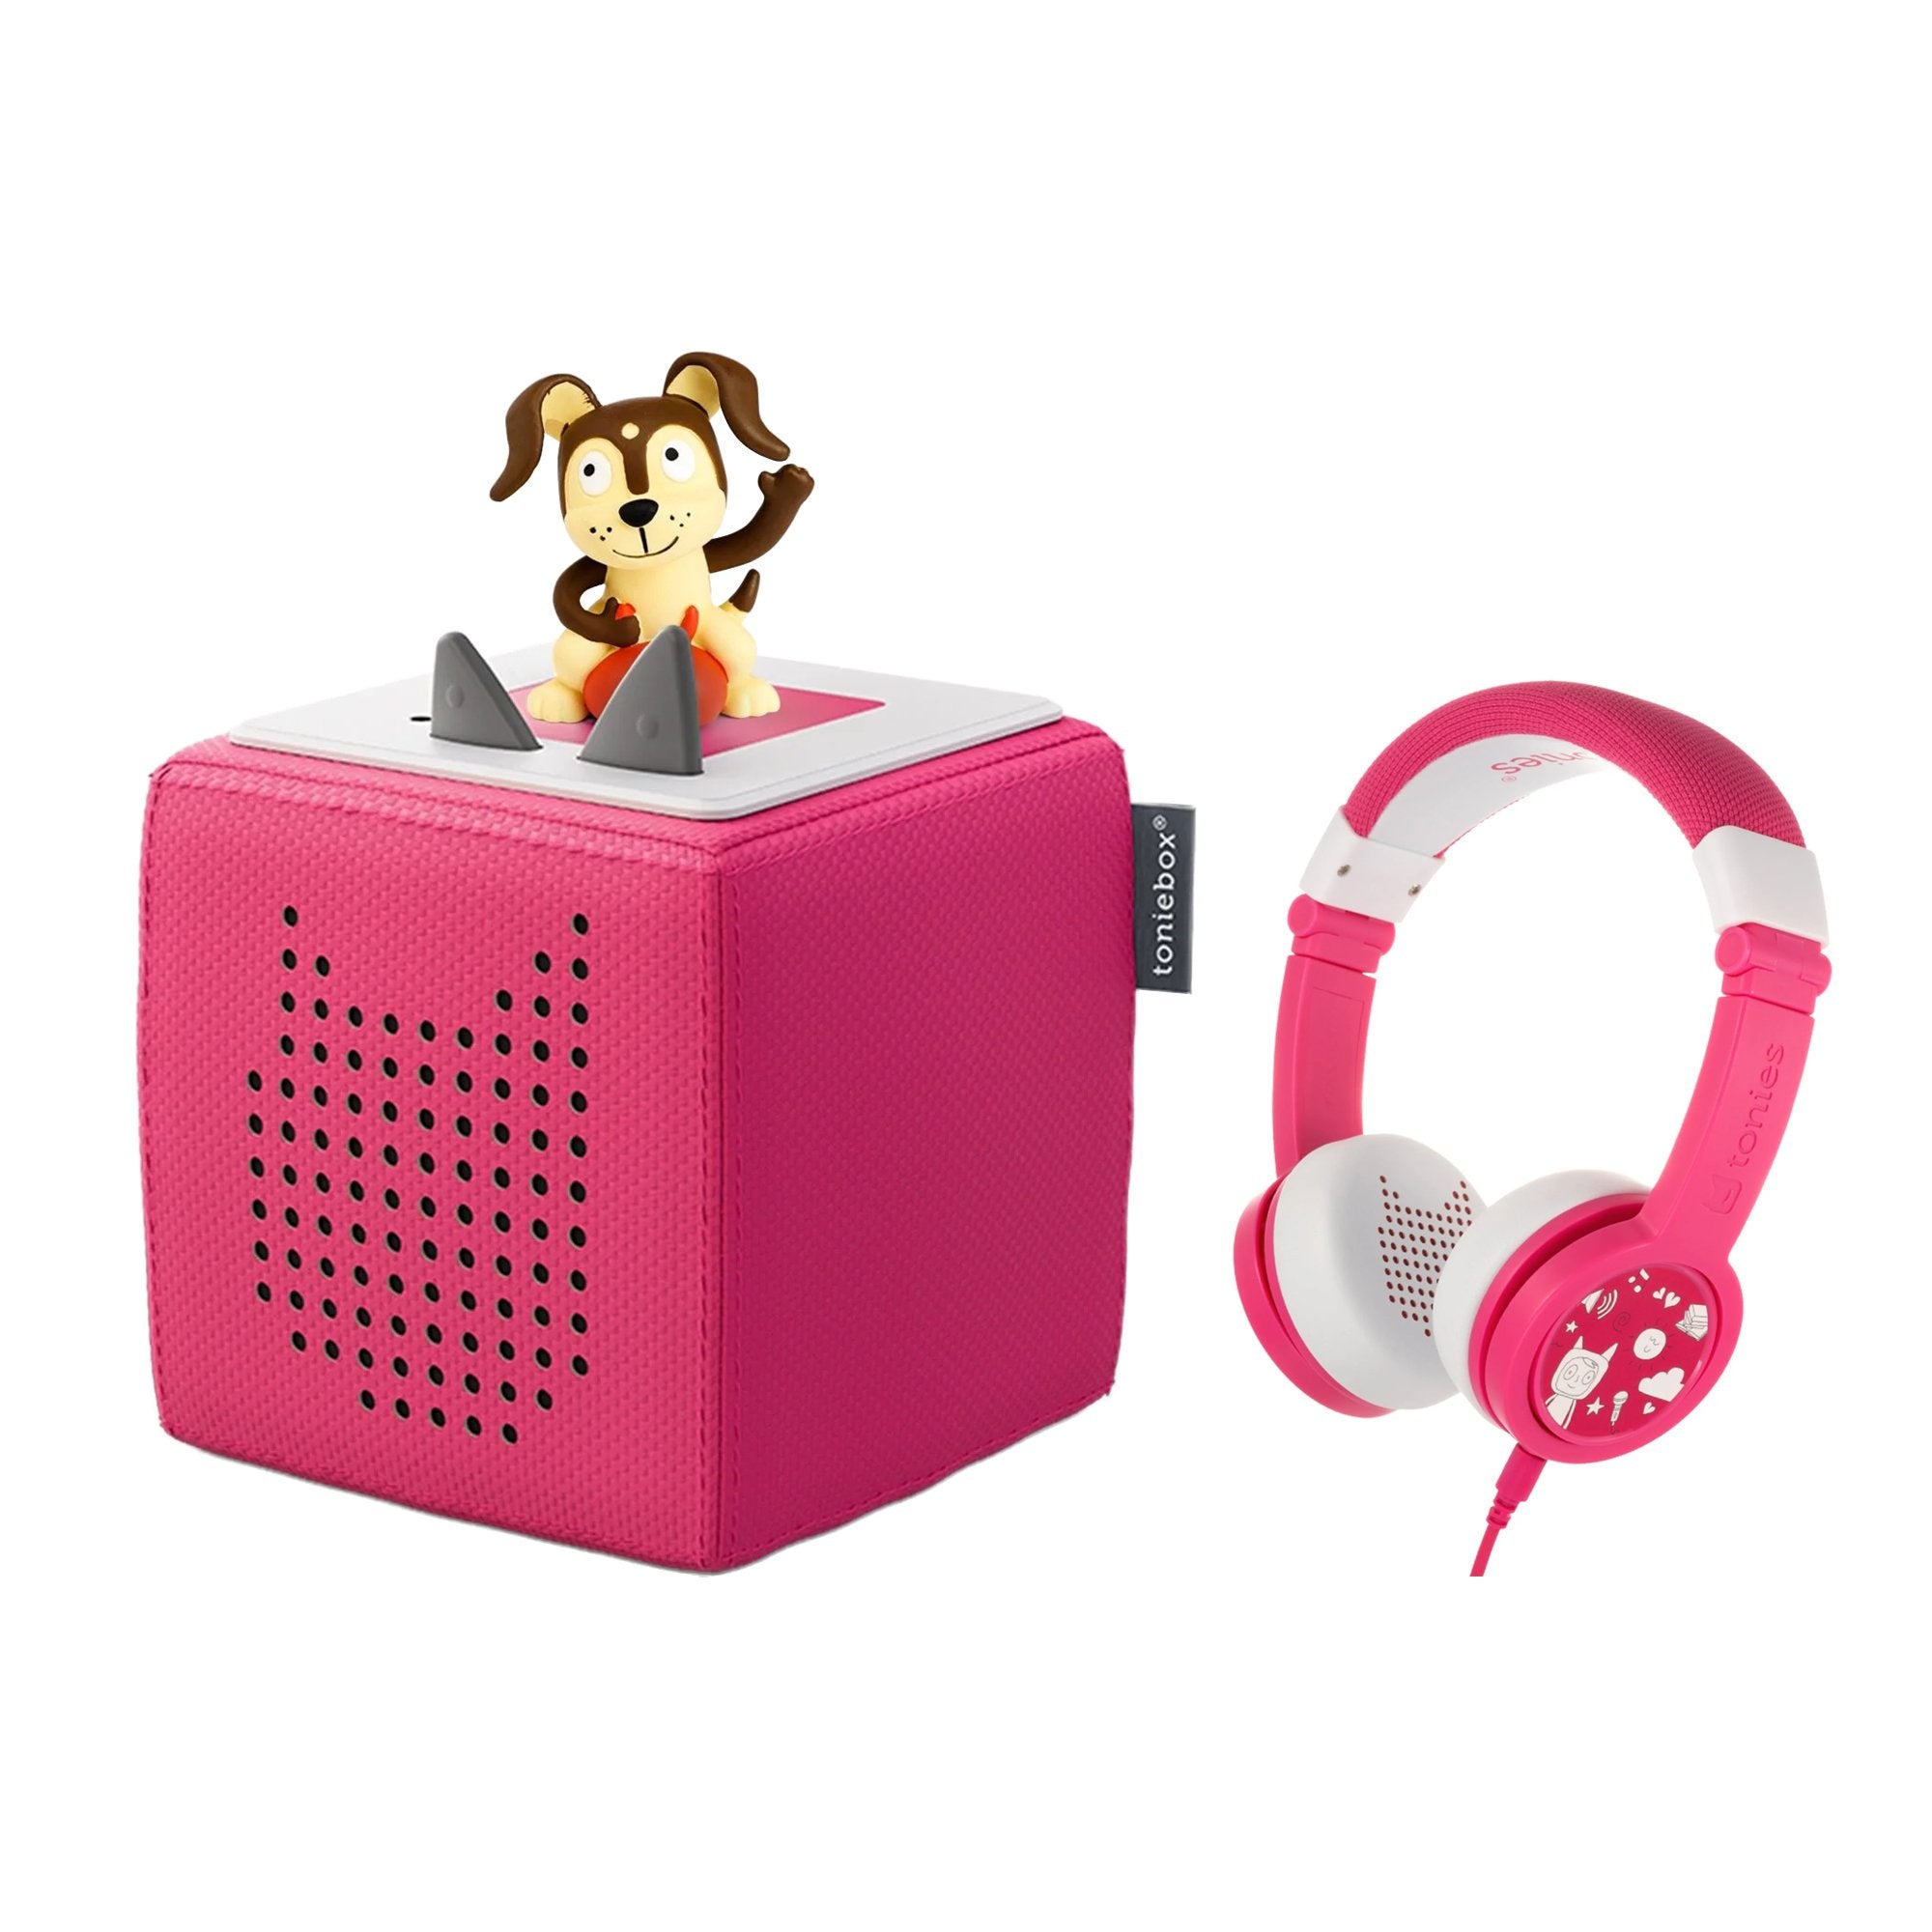 Tonies Toniebox Starter Set with Playtime Puppy – Screen-Free Audio Player  & Educational Listening Experience Pink 10000763 - Best Buy